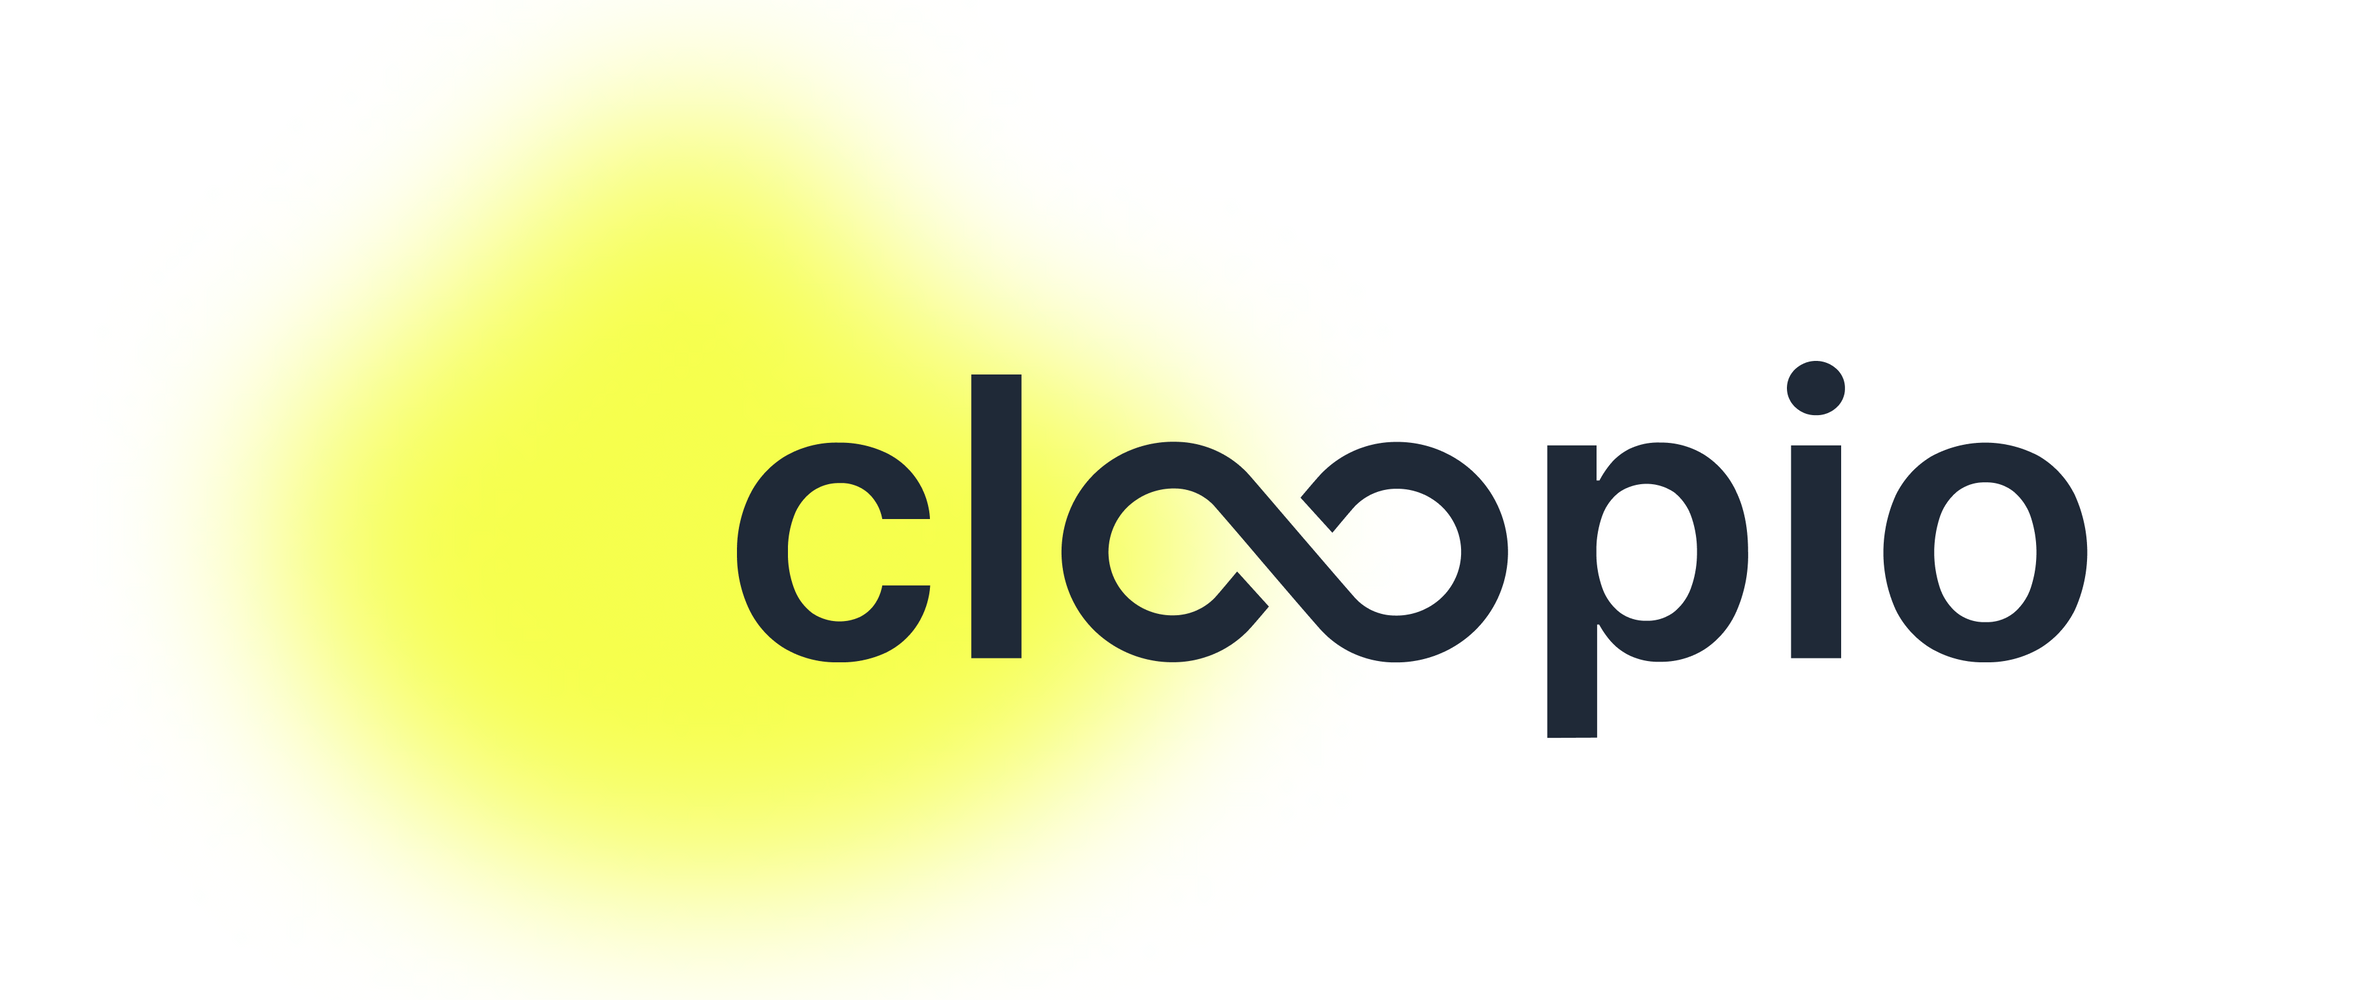 Welcome to Our cloopio Blog! feature image